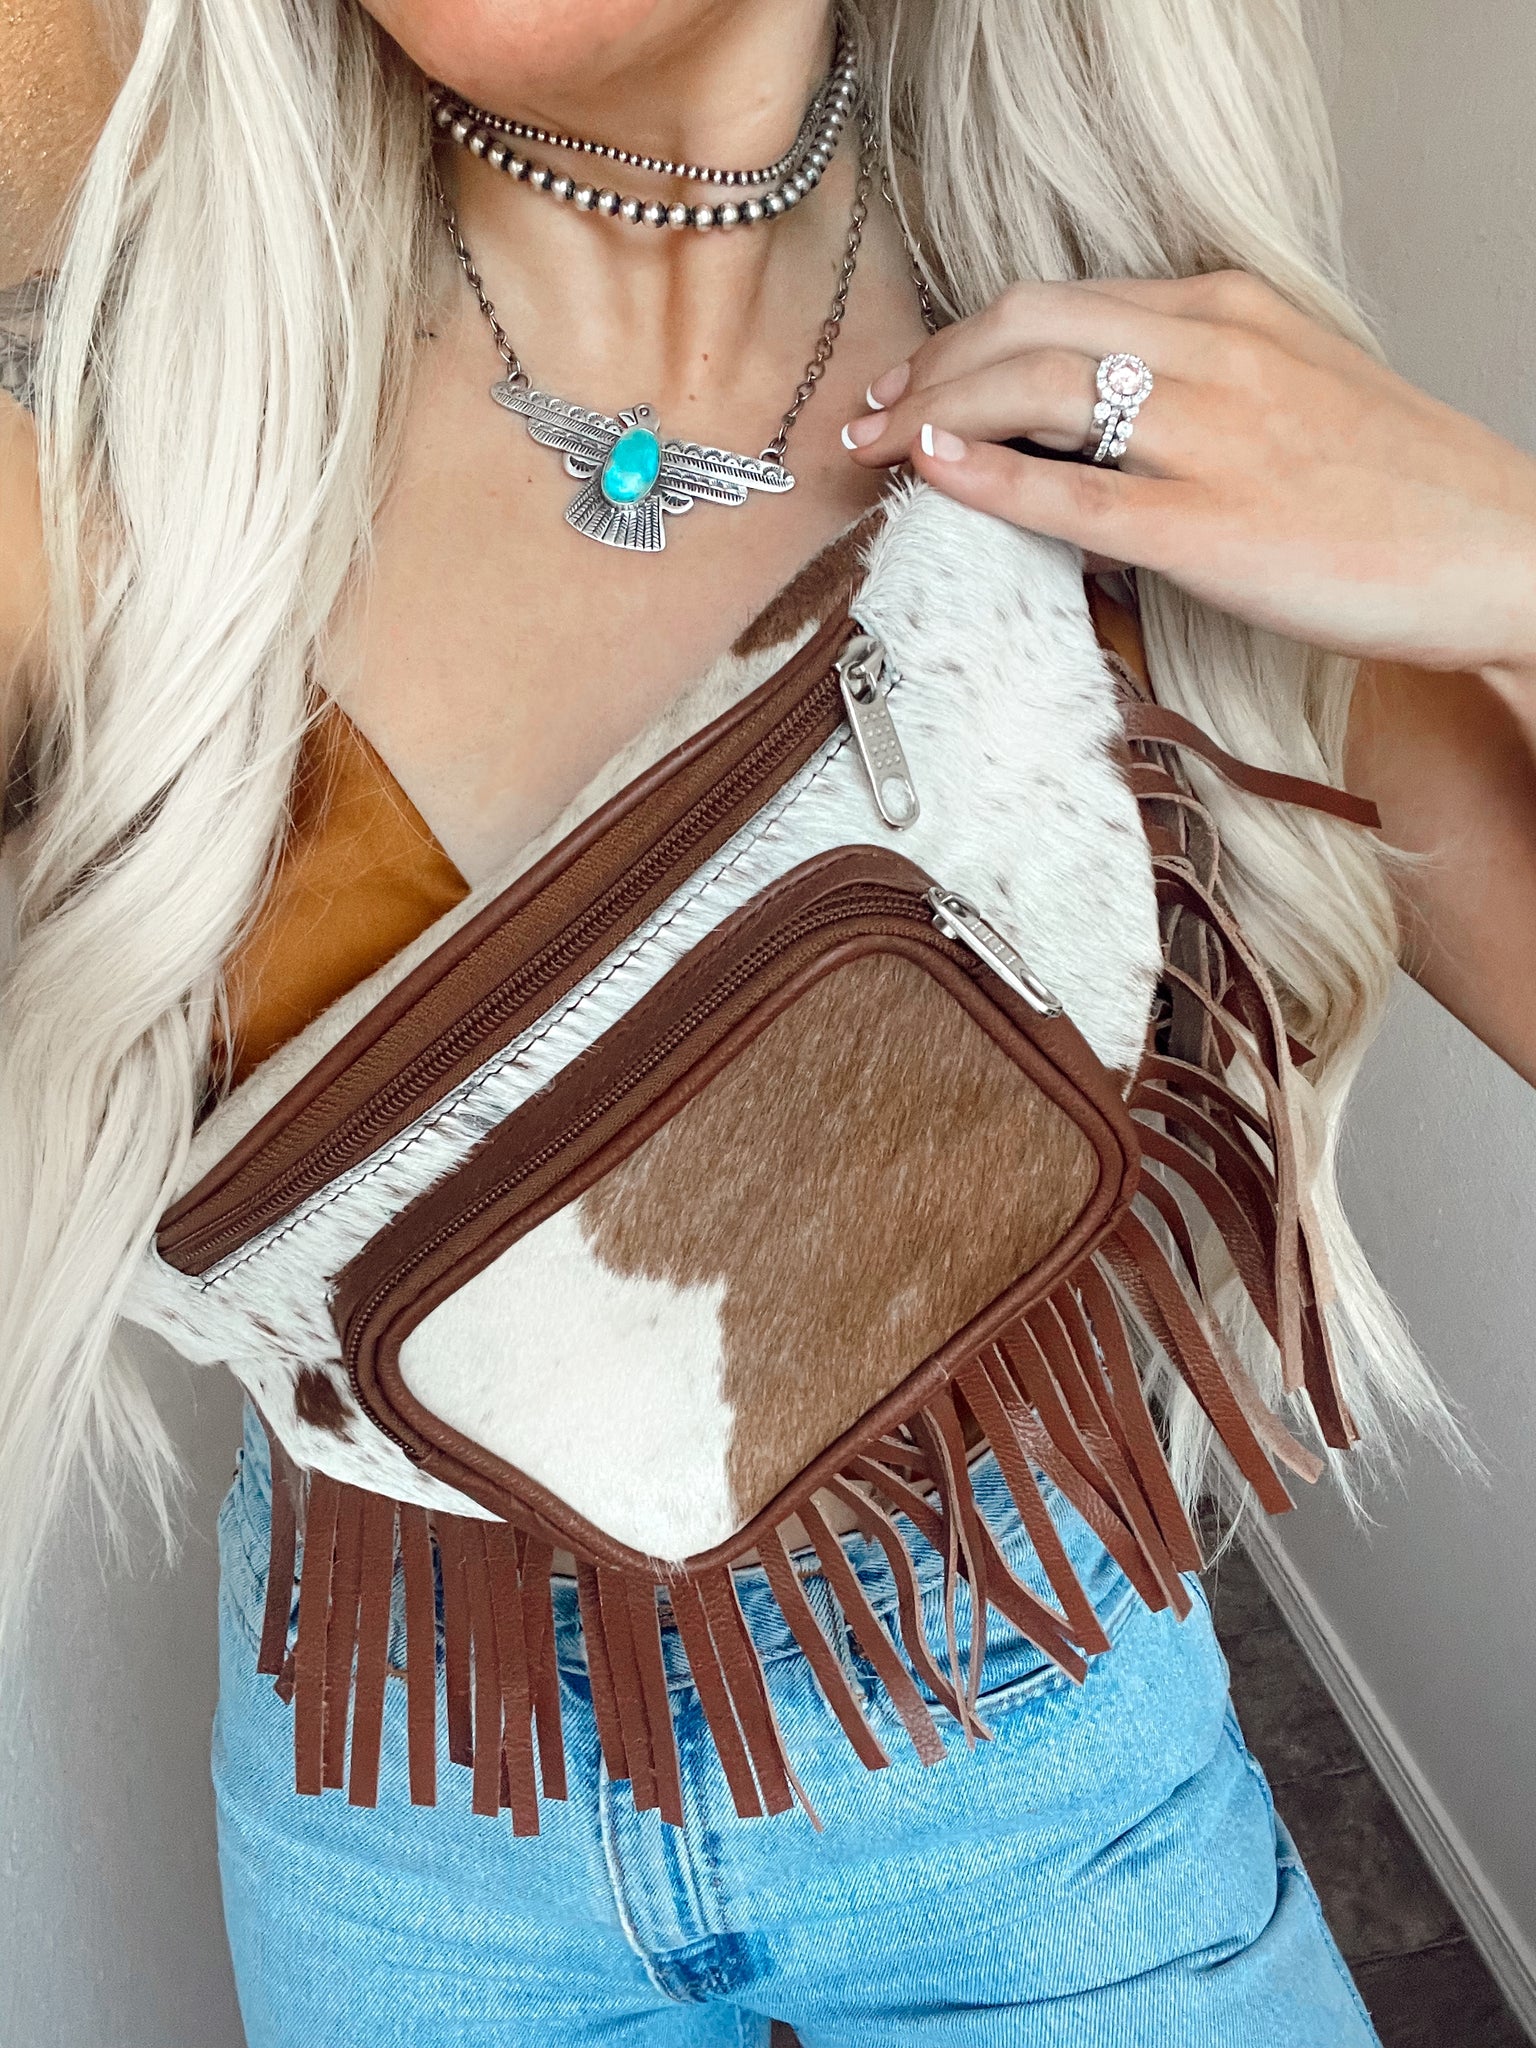 A buckskin purse for my 3 year old niece, to hold the rocks she likes to  collect. : r/Leathercraft